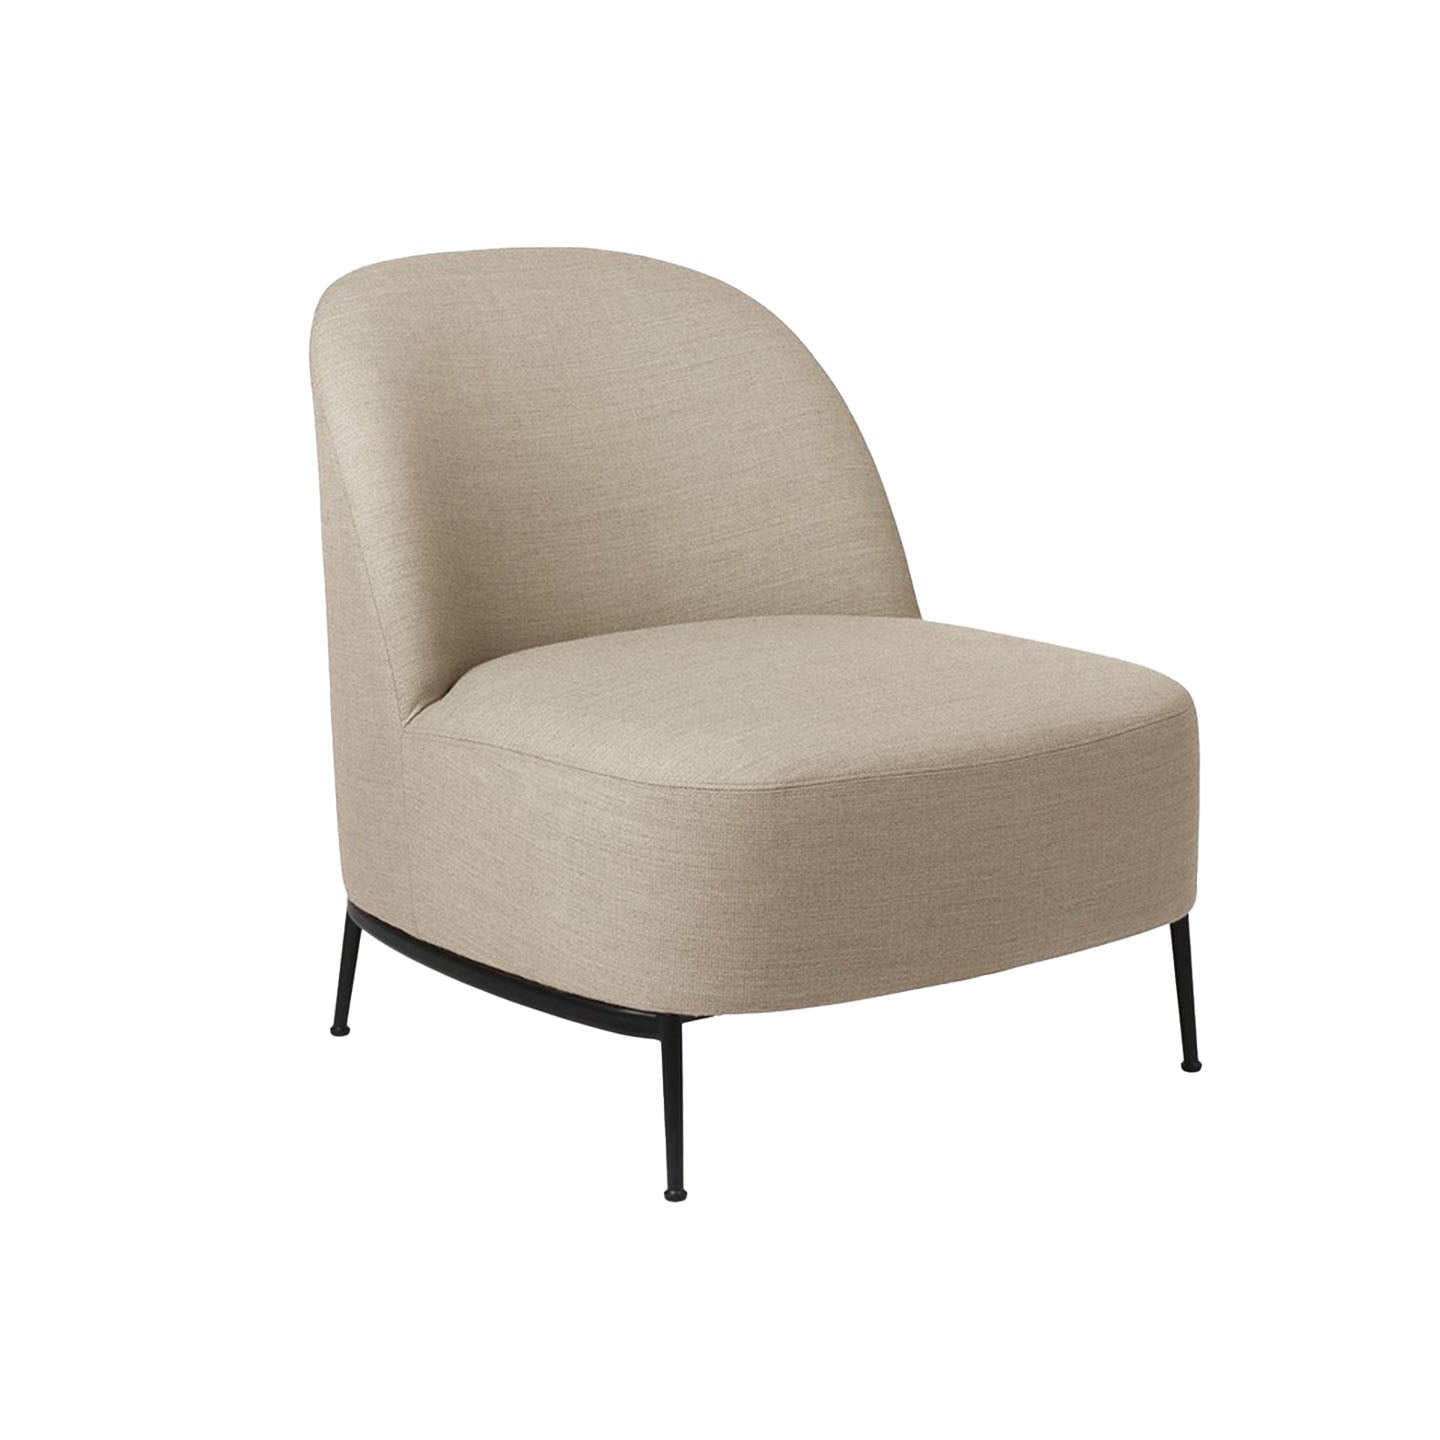 Ithaca Lounge Chair